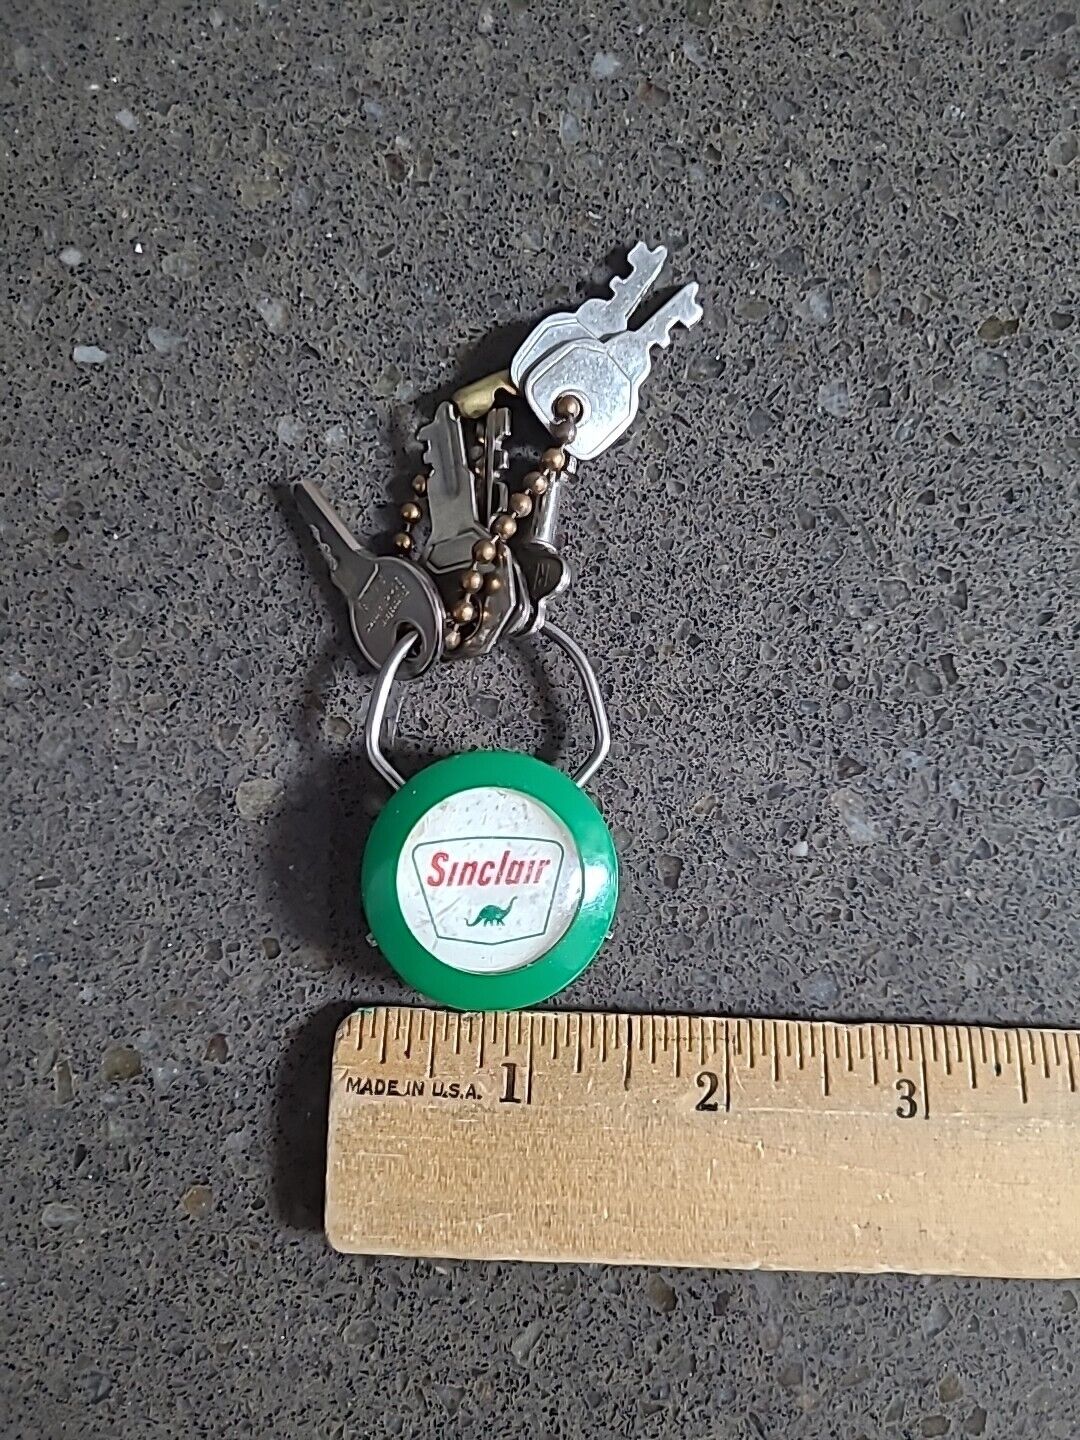 Vintage SINCLAIR OIL GAS Old Key Chain Ring With Several Small Keys